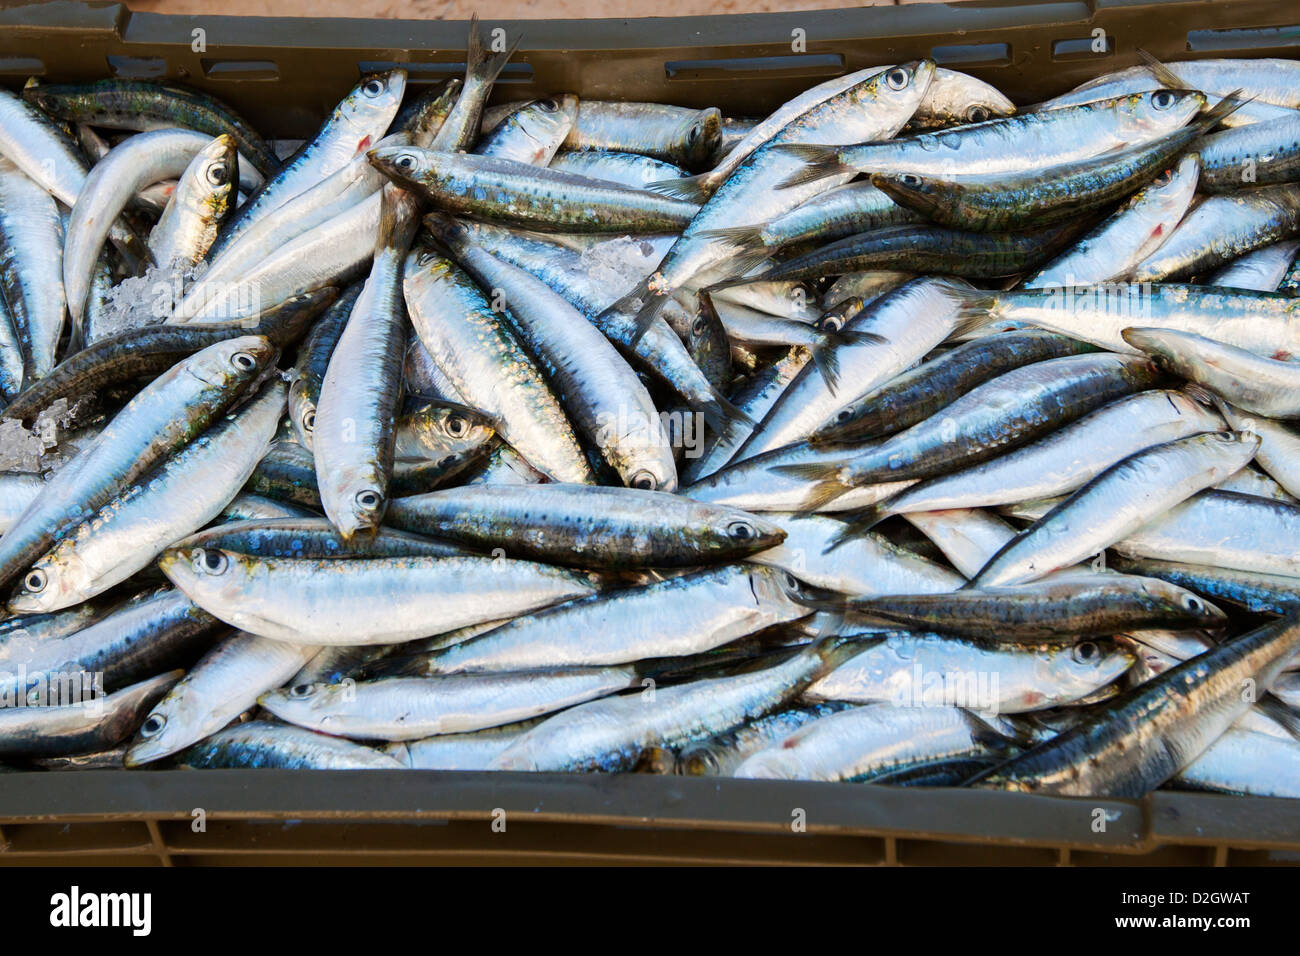 A box of freshly caught fish Stock Photo